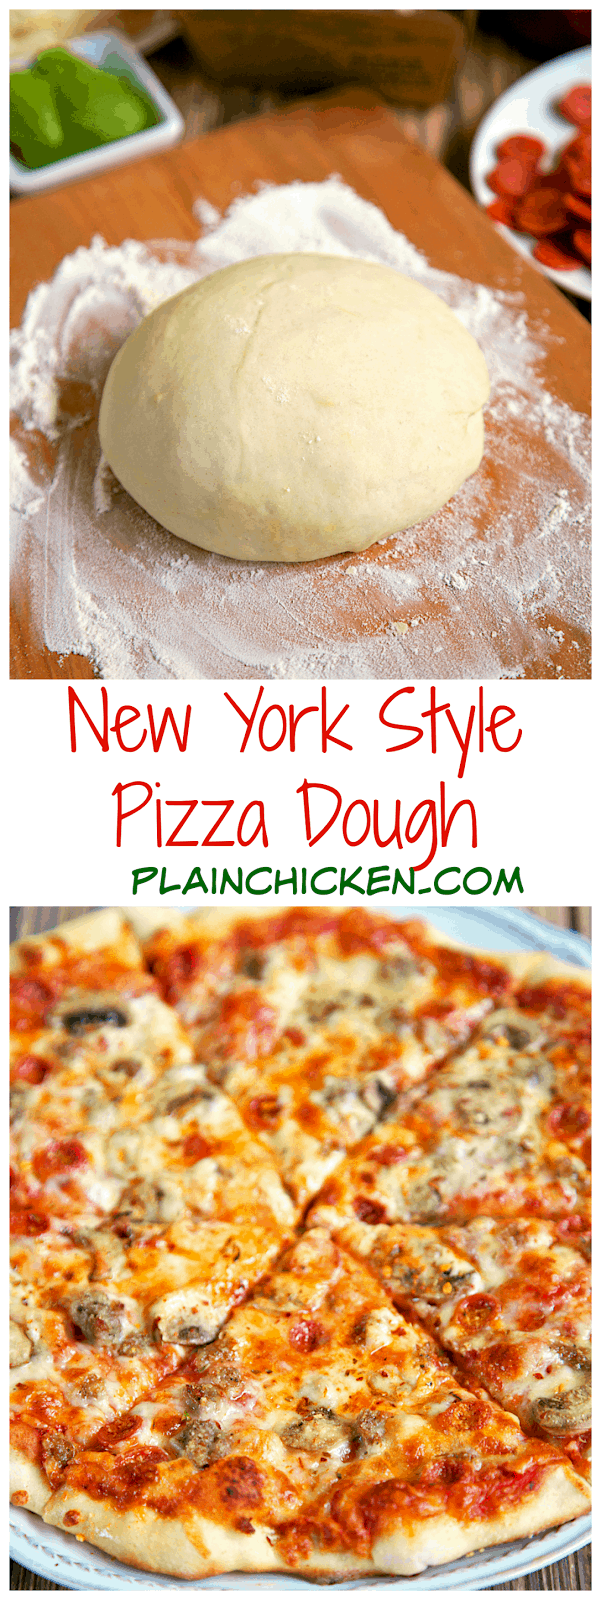 New York Style Pizza Dough Recipe - only 4 ingredients to make the best pizza dough - this dough is so easy to work with! Make the dough and refrigerate until ready to use. Can make up to 3 or 4 days in advance.